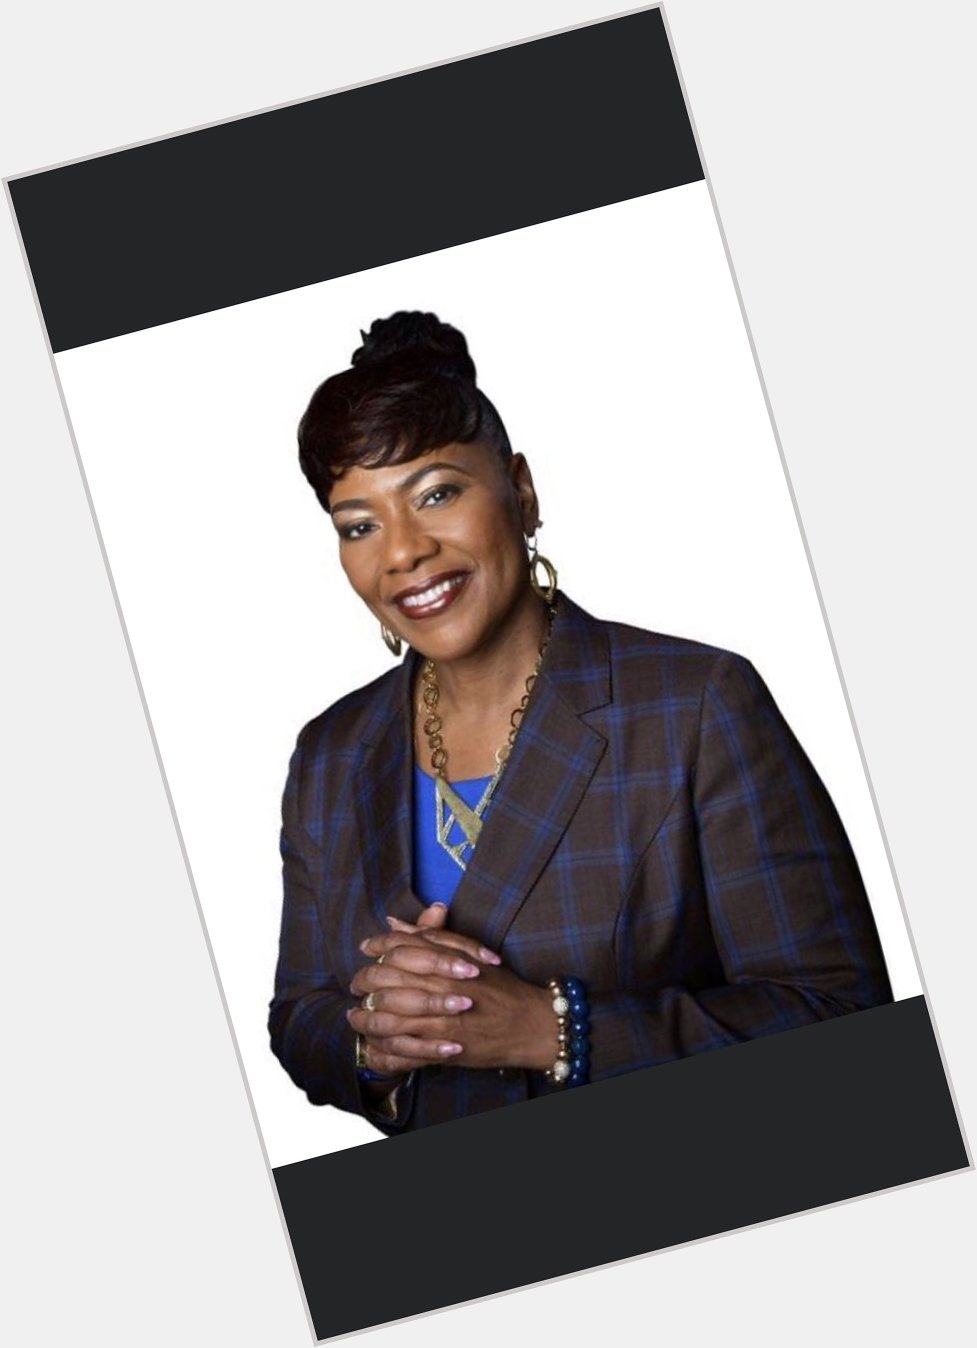 Happy Birthday Bernice King- lawyer, minister & youngest child of Dr Martin Luther King Jr & Coretta Scott King. 